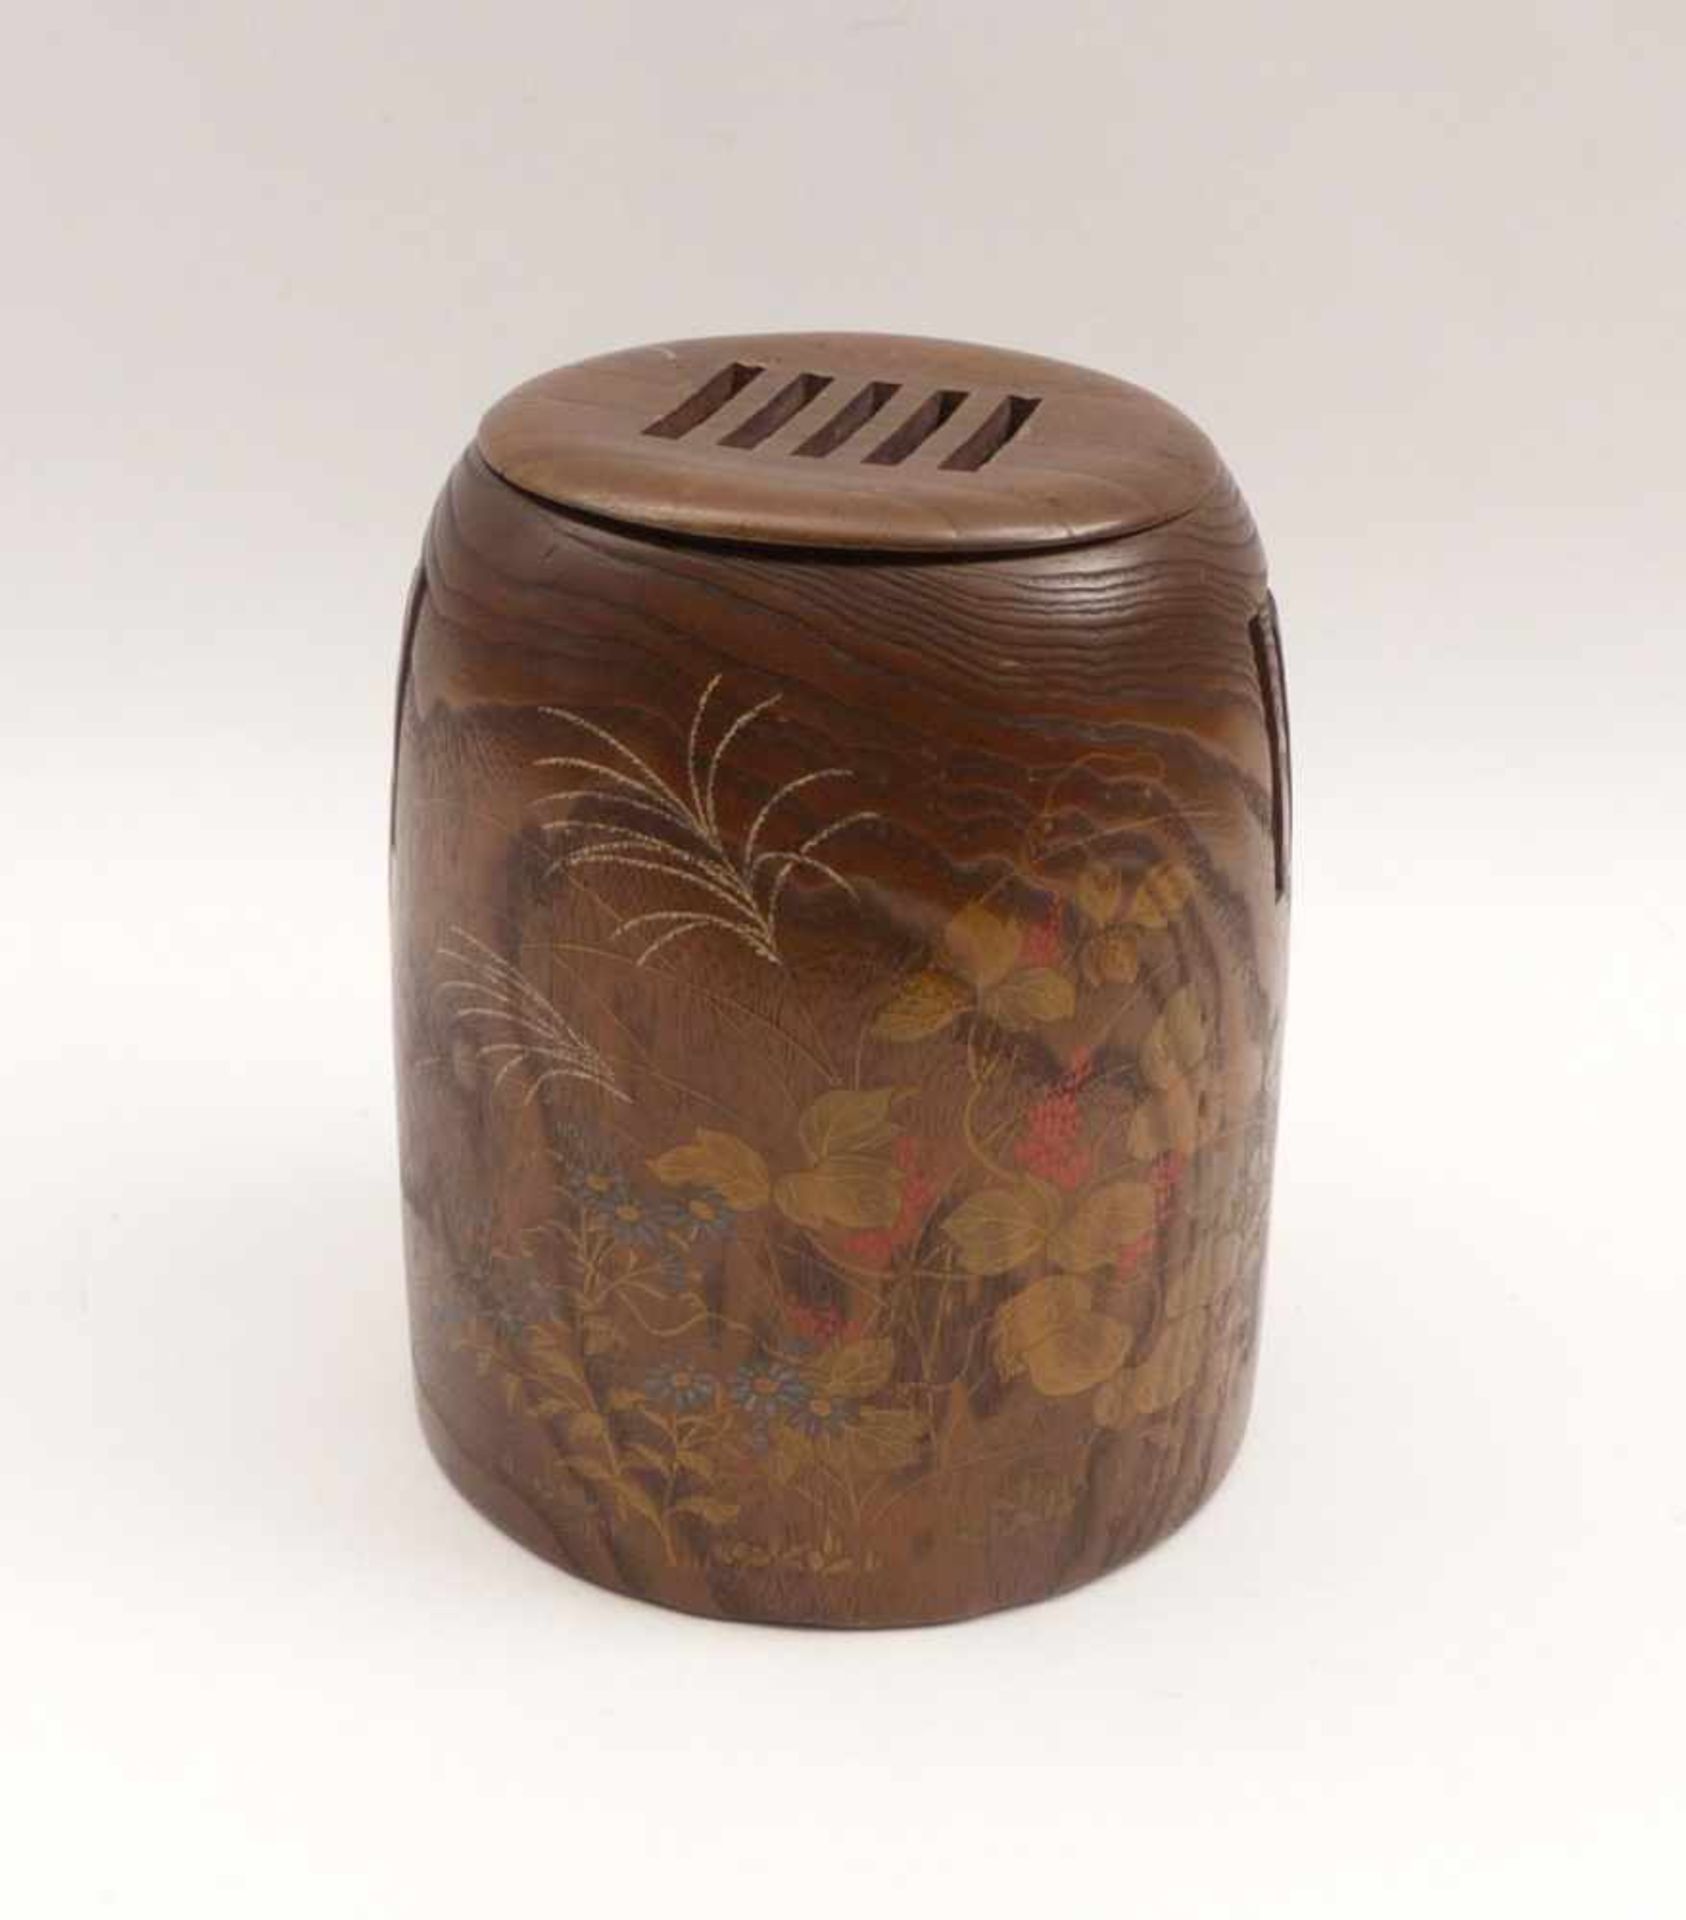 Covered holder for incense sticksJapan, Meiji PeriodWood (bamboo?), colored lacquer paint, copper